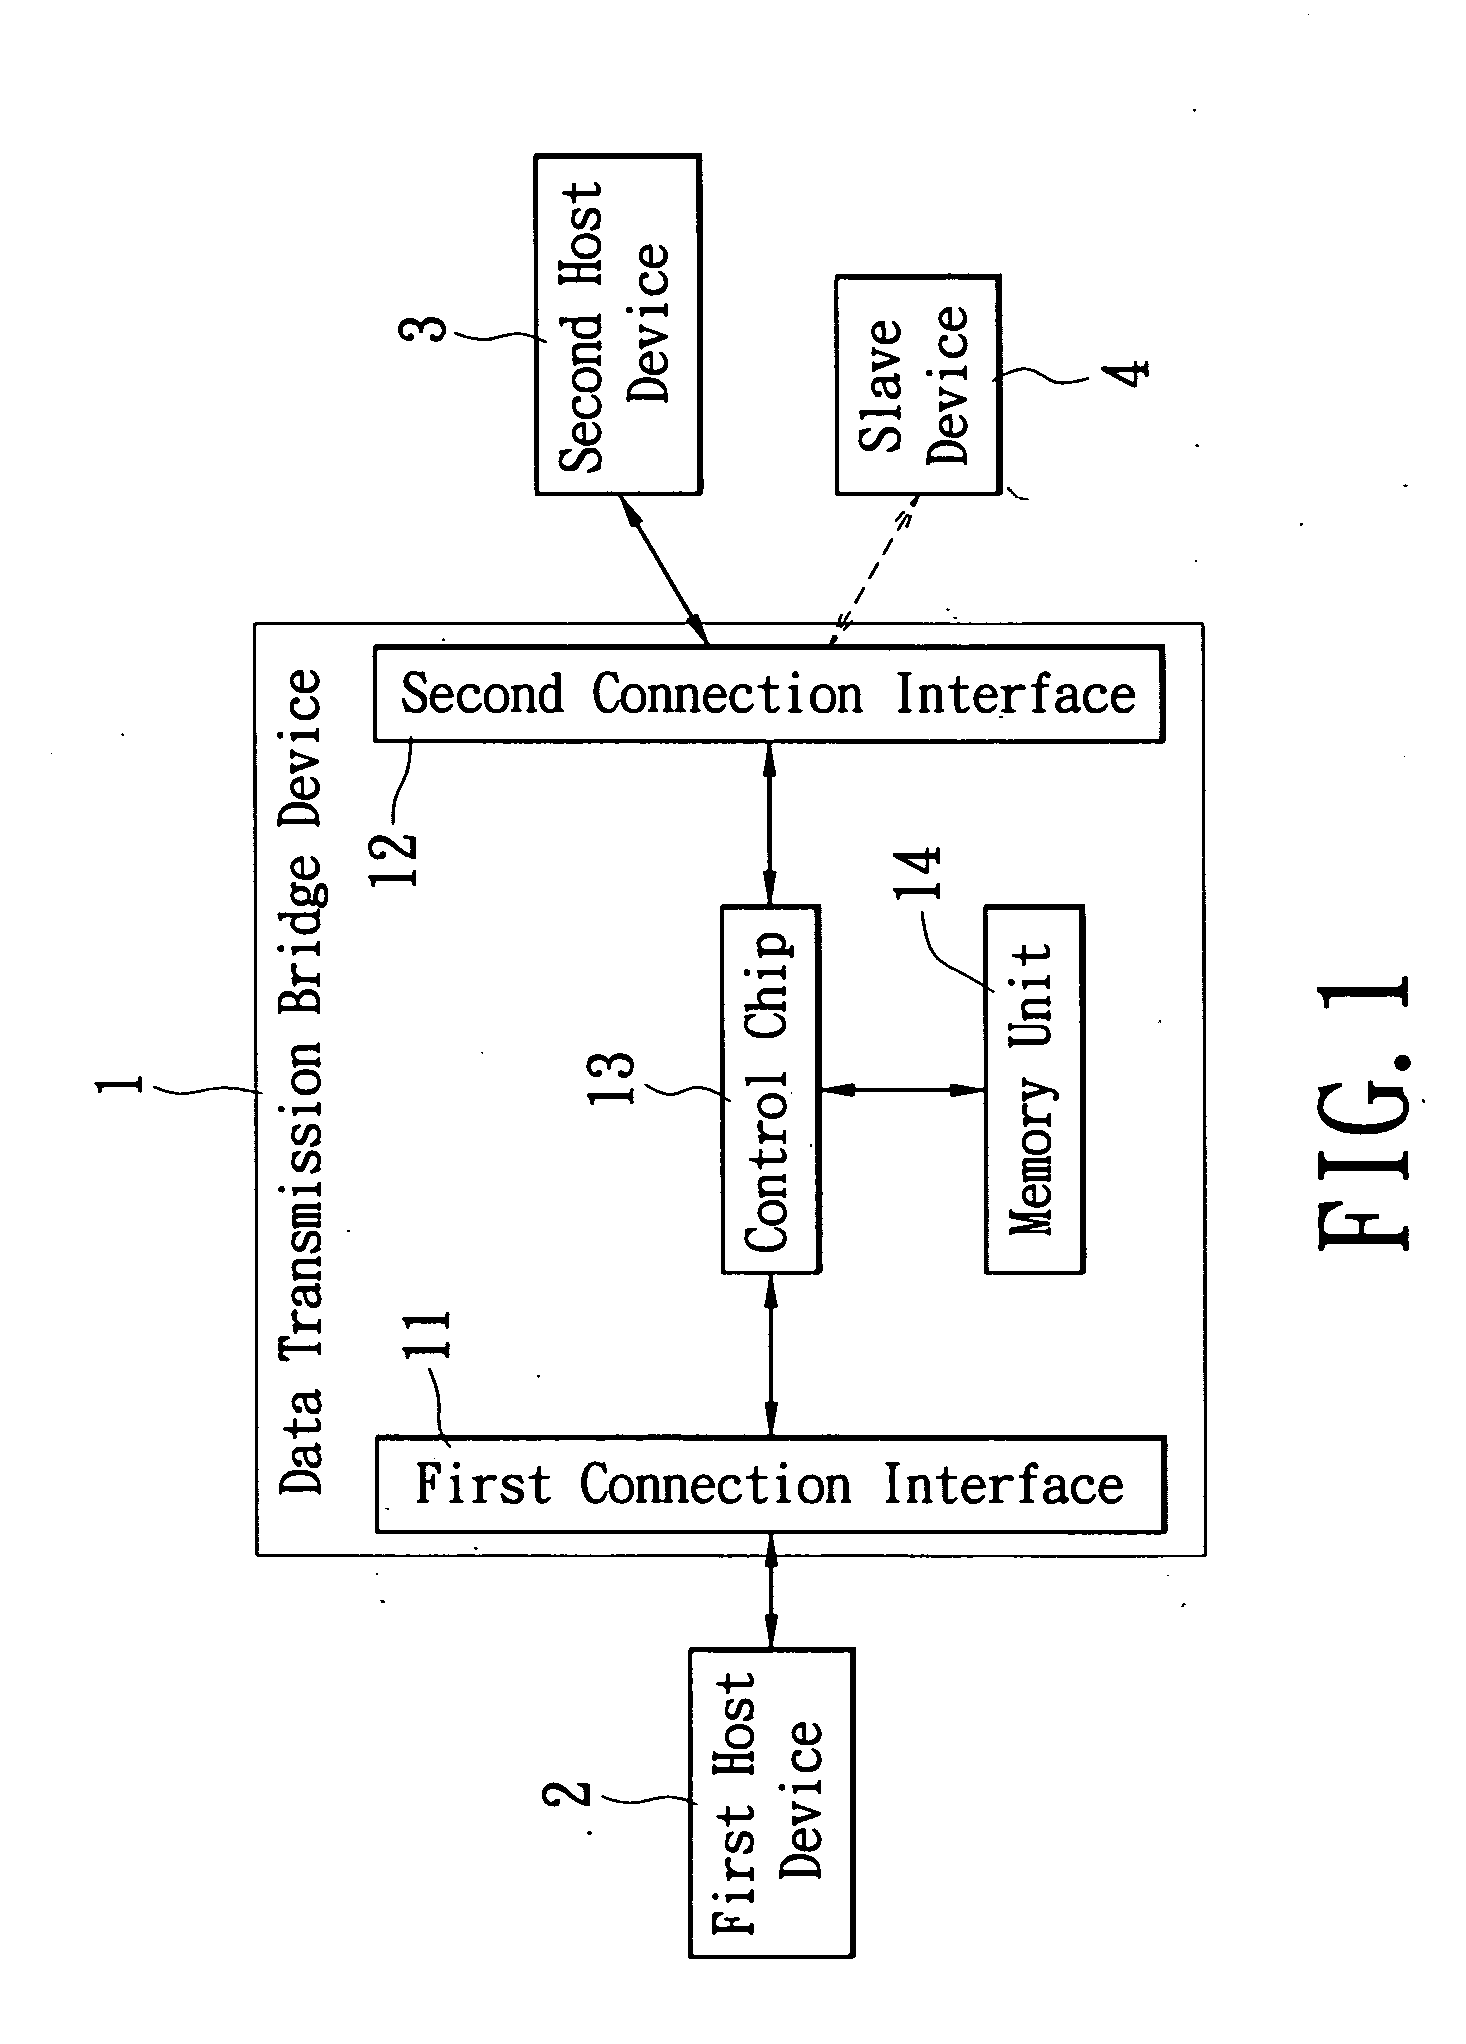 Data transmission bridge device and control chip thereof for transmitting data